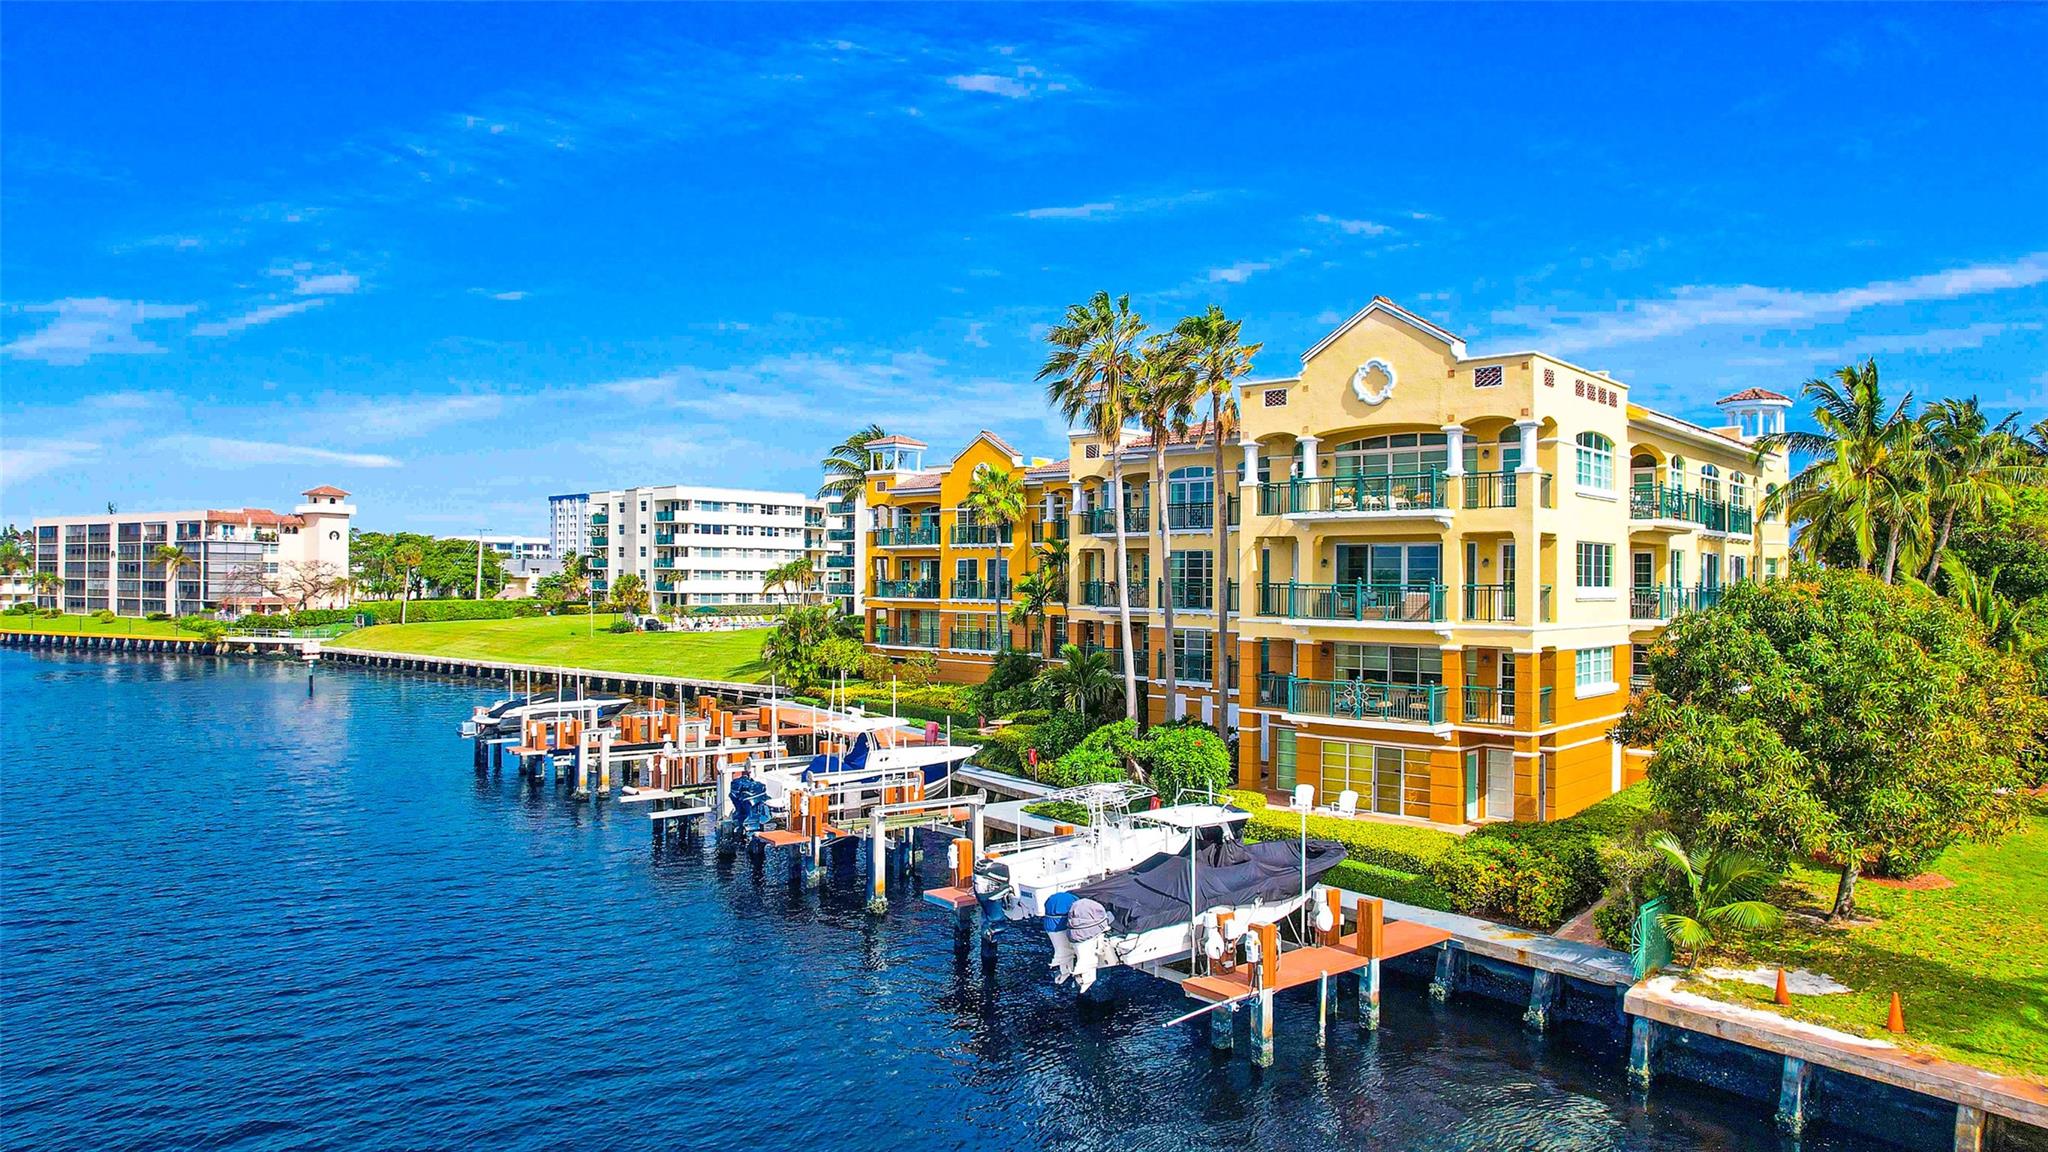 Presenting Mediterranea, a waterfront abode that promises an unmatched lifestyle. This property comes complete with a private boat dock, ensuring you can fully immerse yourself in the coastal experience. Indulge in premium amenities and be mesmerized by the breathtaking views of the intracoastal that welcome you each day. This expansive 2,470 Sq. Ft. home features 3 bedrooms and 3 bathrooms, delivering both comfort and seclusion. Step onto your generously sized balcony to absorb the surroundings, enhanced by 10-foot ceilings and newly installed impact windows throughout. Situated on the prestigious Hillsboro Mile, this home provides exclusive beach access for those seeking a serene retreat by the ocean.